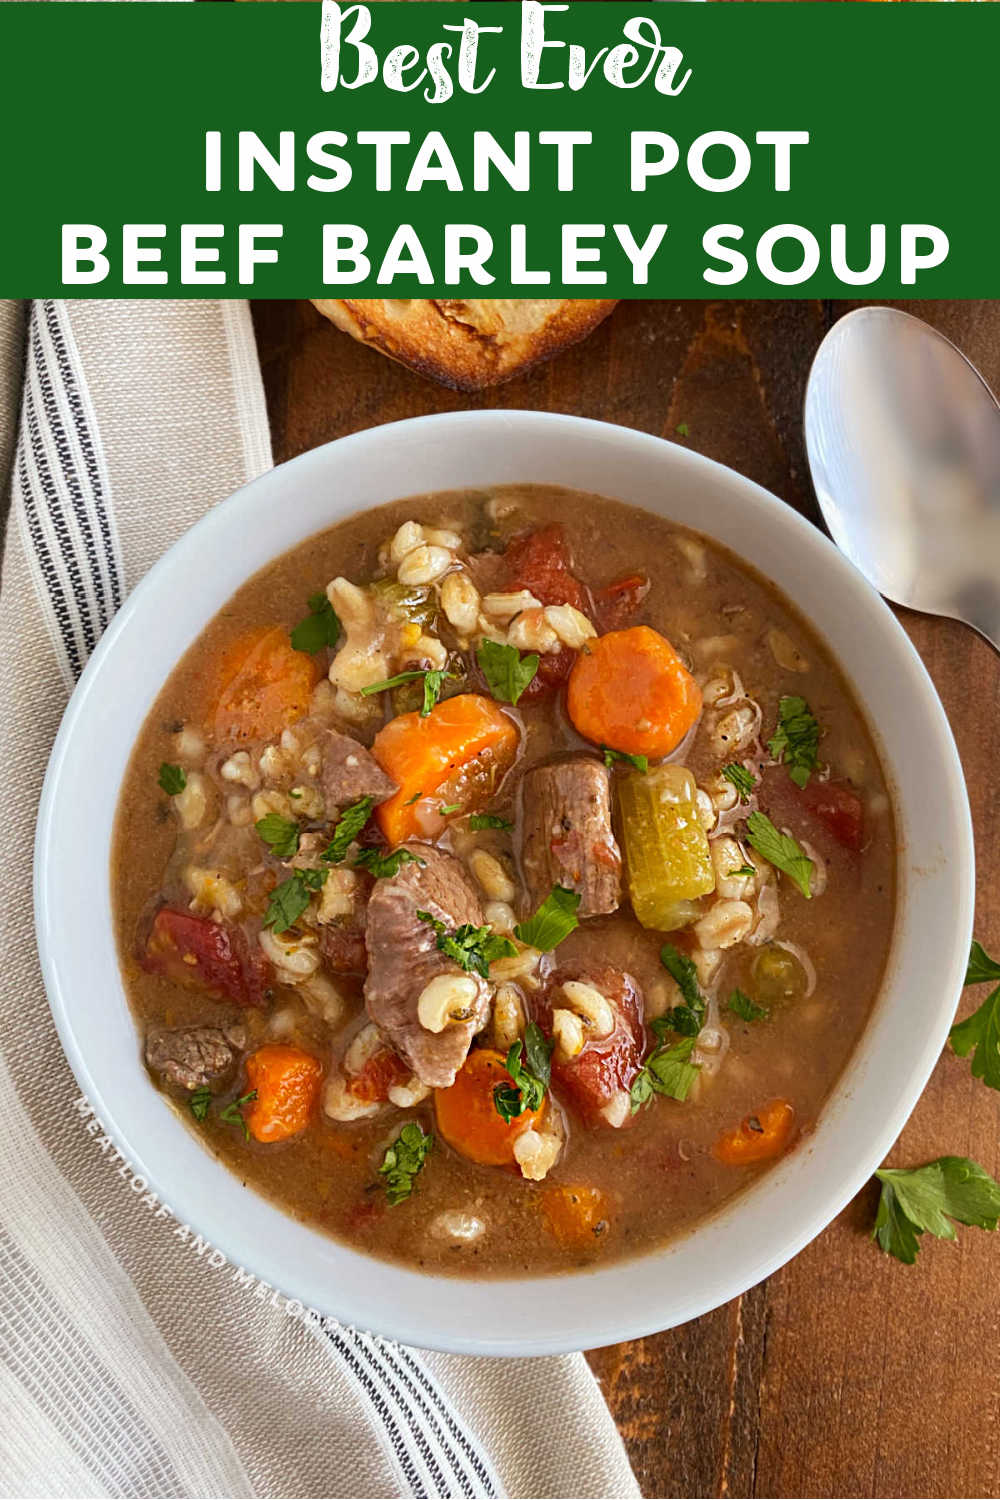 Instant Pot Beef Barley Soup made with tender chunks of beef, pearl barley and fresh vegetables in flavorful beef broth is the perfect meal to warm up a cold day. This homemade soup is Grandma's recipe made easy in the pressure cooker! via @meamel